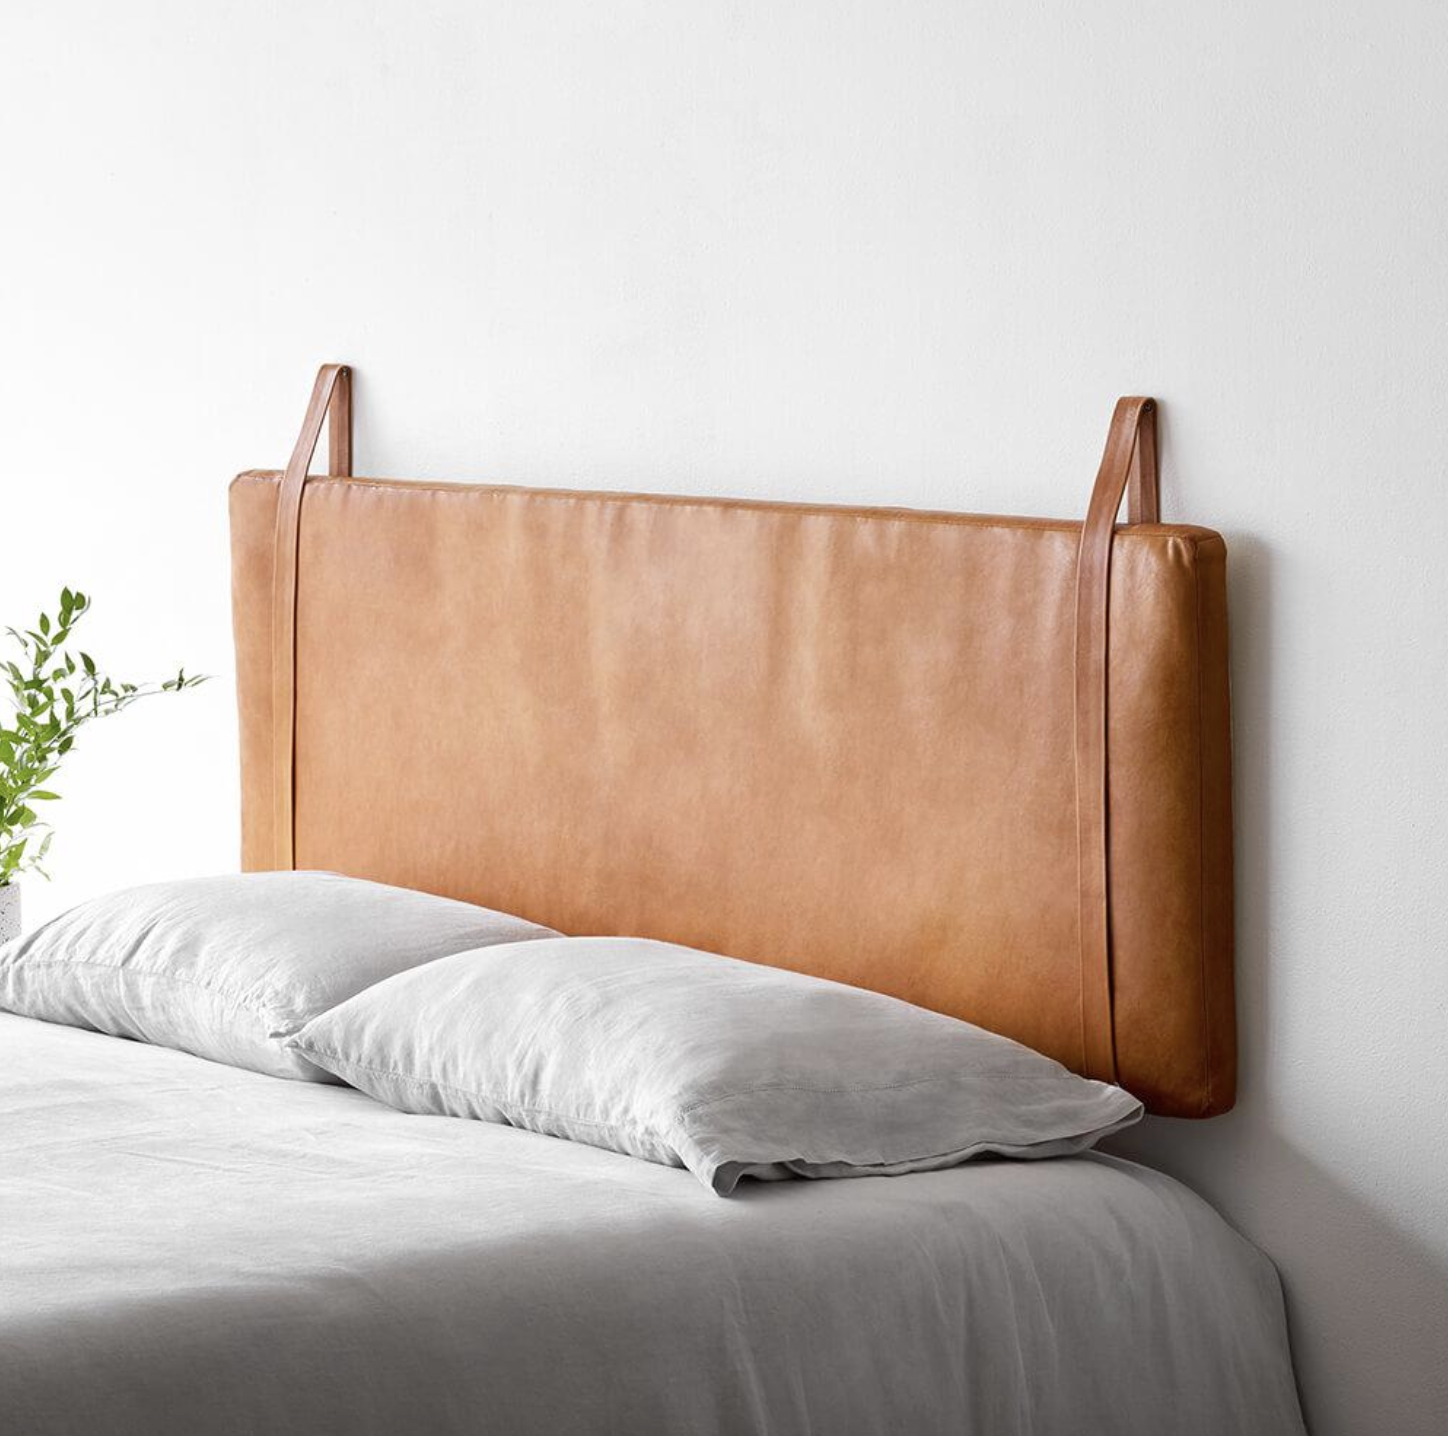 9 Wall Mounted Floating Headboards We, How Do I Mount A Headboard To The Wall